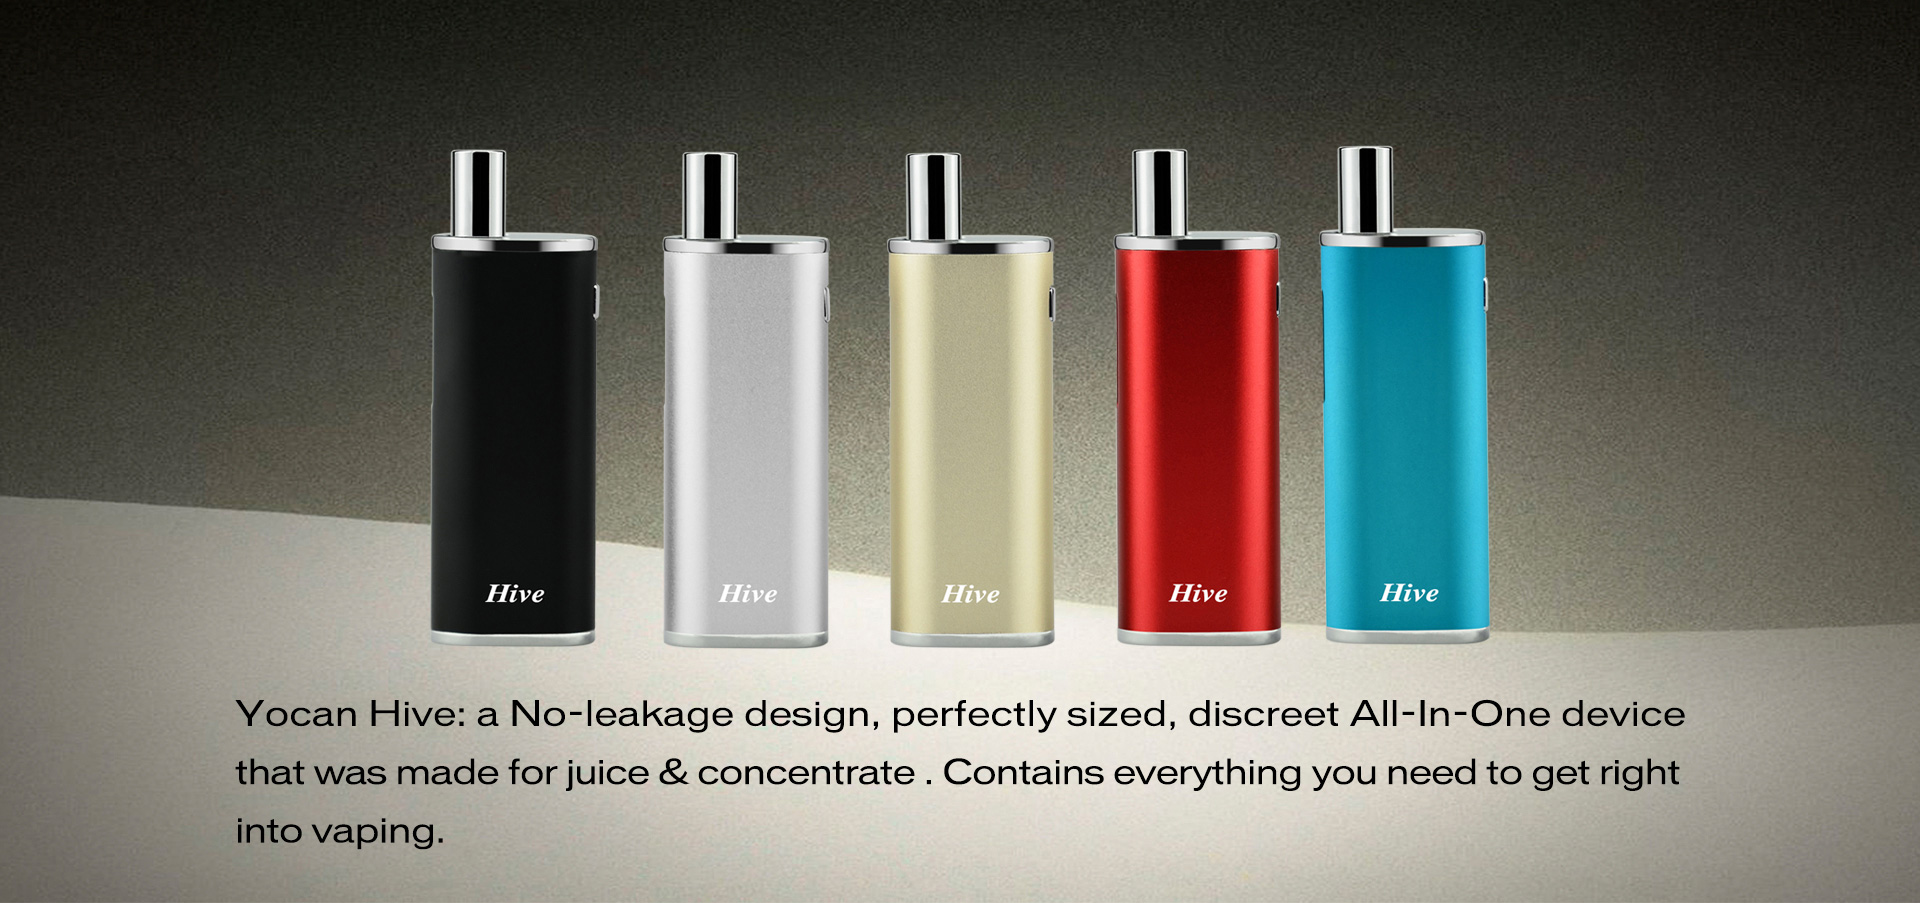 The Yocan Hive Vape Kit is a 2-in-1 multi-vaporizer that discrete portability and convenience for vaping e-liquids, oil and wax concentrates on the go.